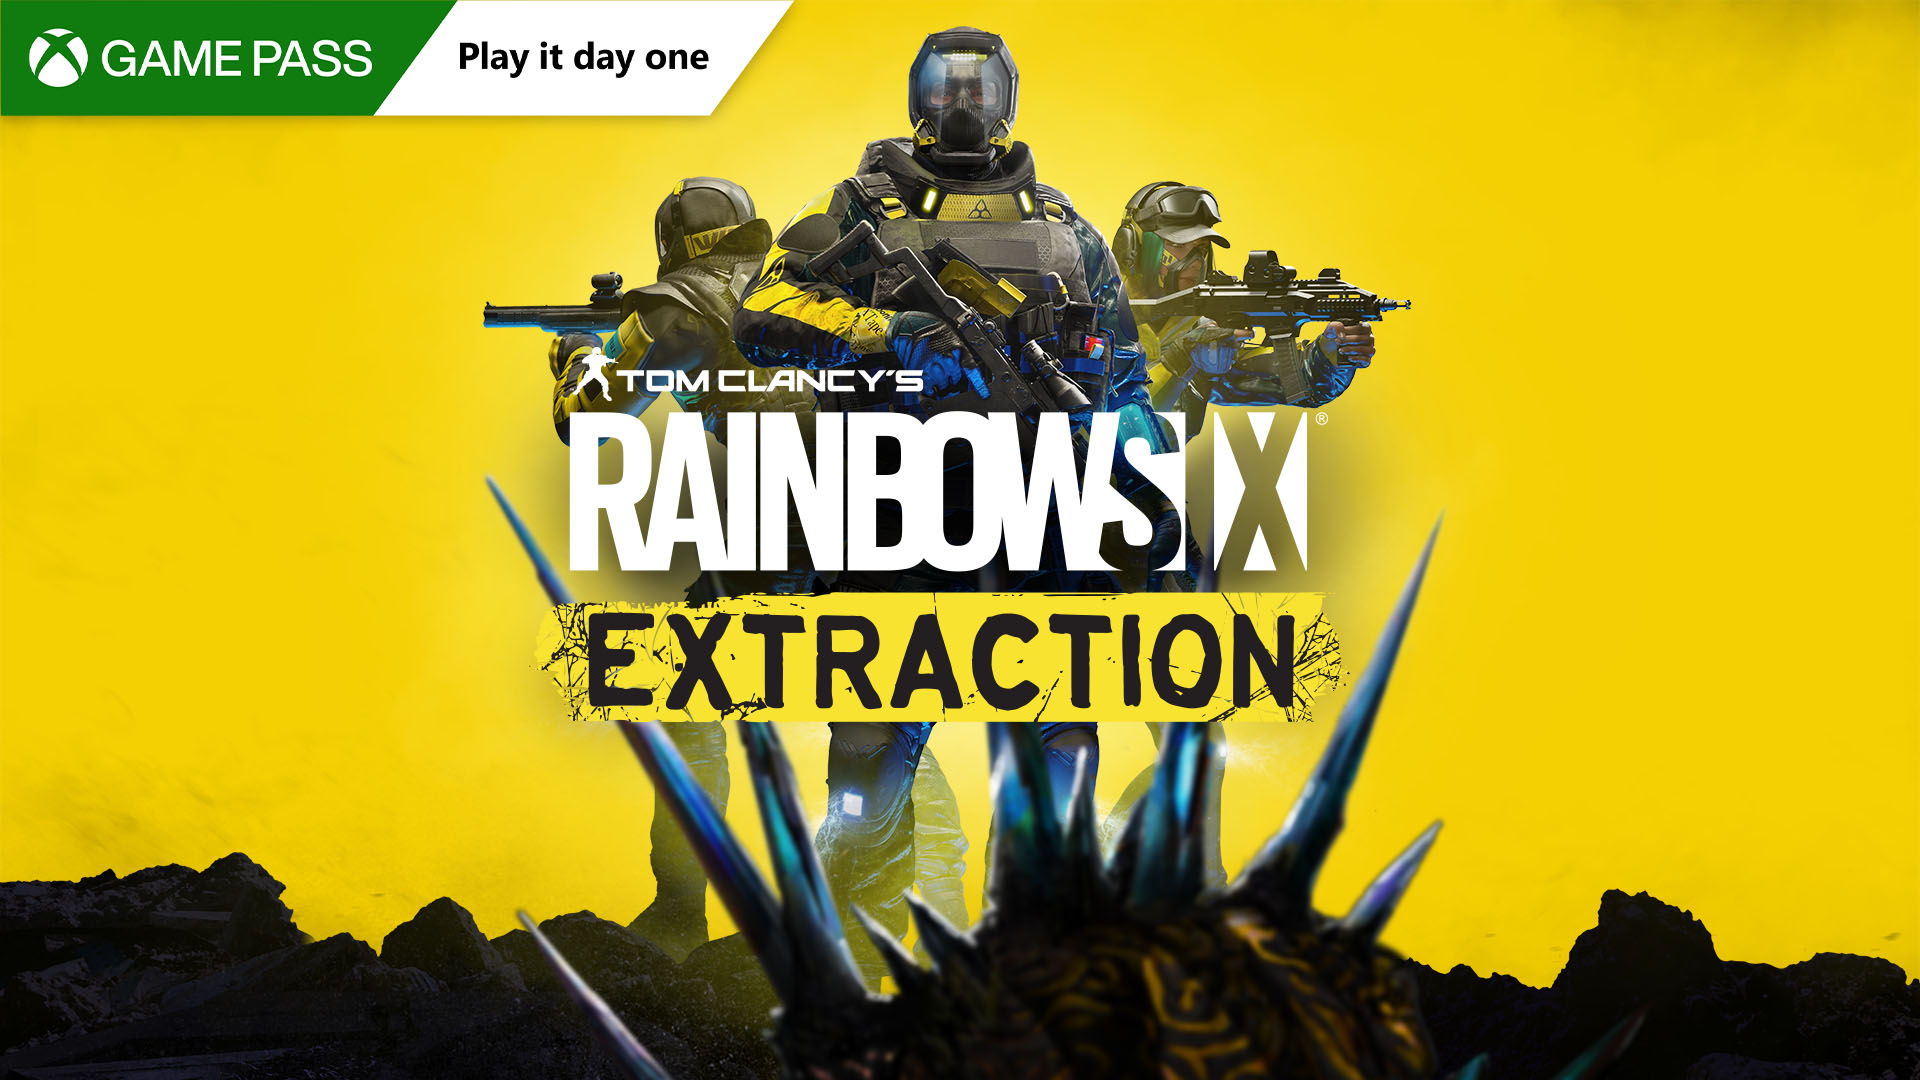 Rainbow Six Extraction Game Pass: Is Extraction coming to Game Pass